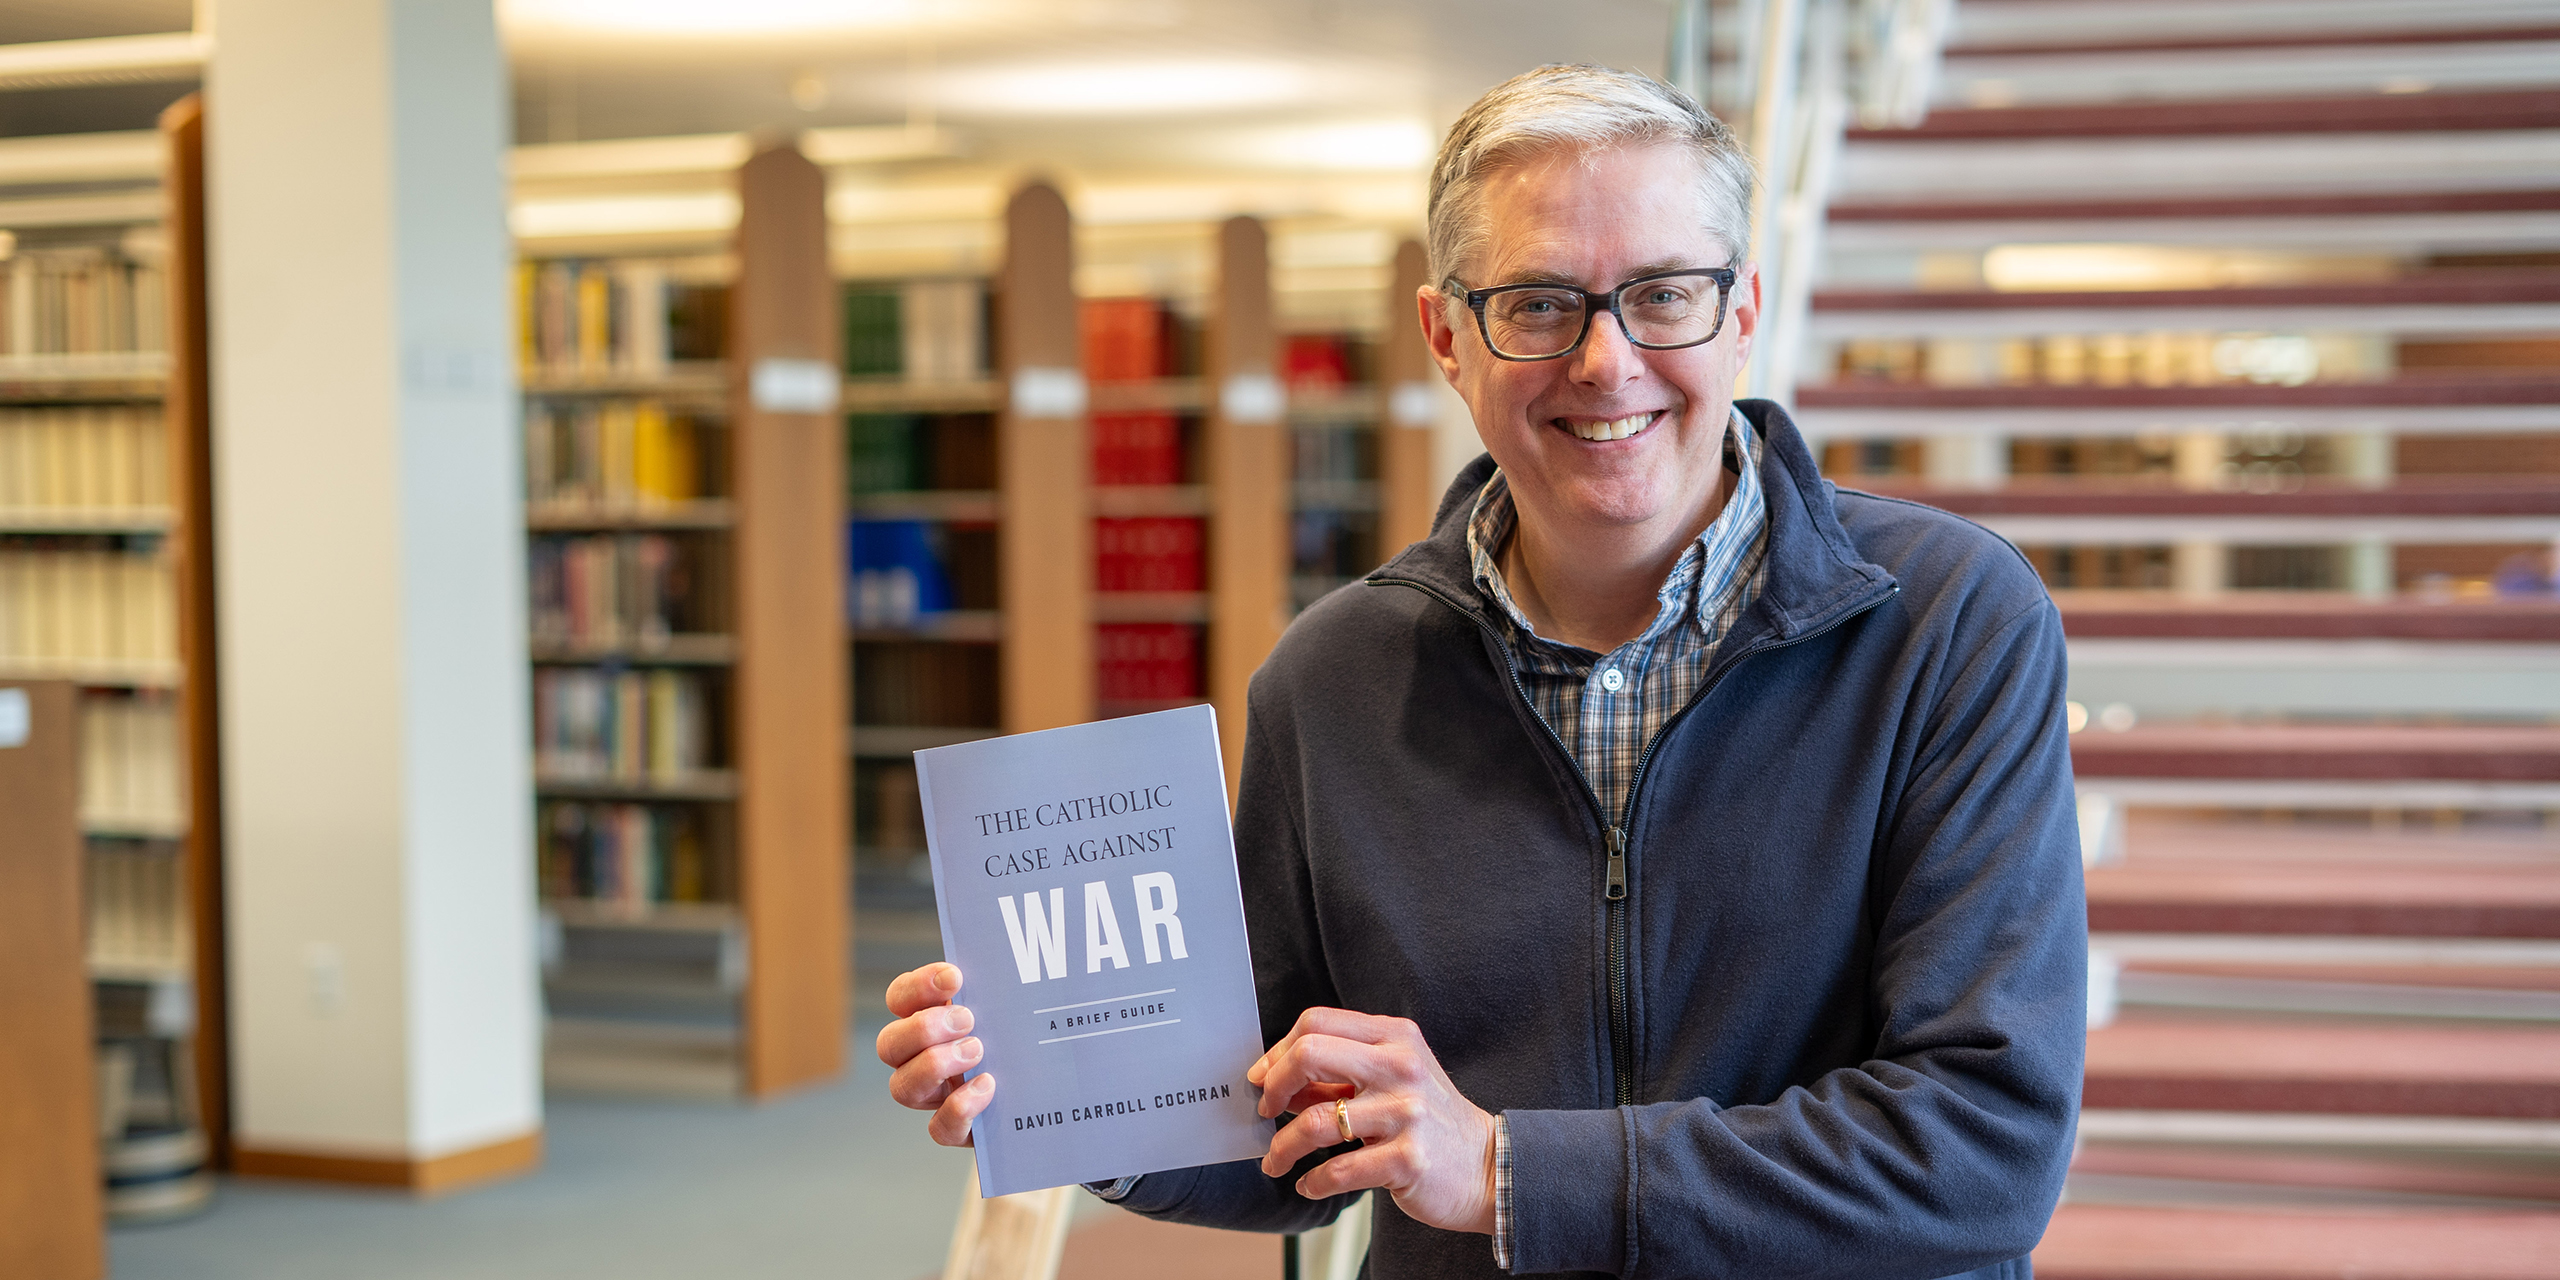 Professor David Cochran stands in the Loras College library, holding and displaying his new book, "The Catholic Case Against War: A Brief Guide."